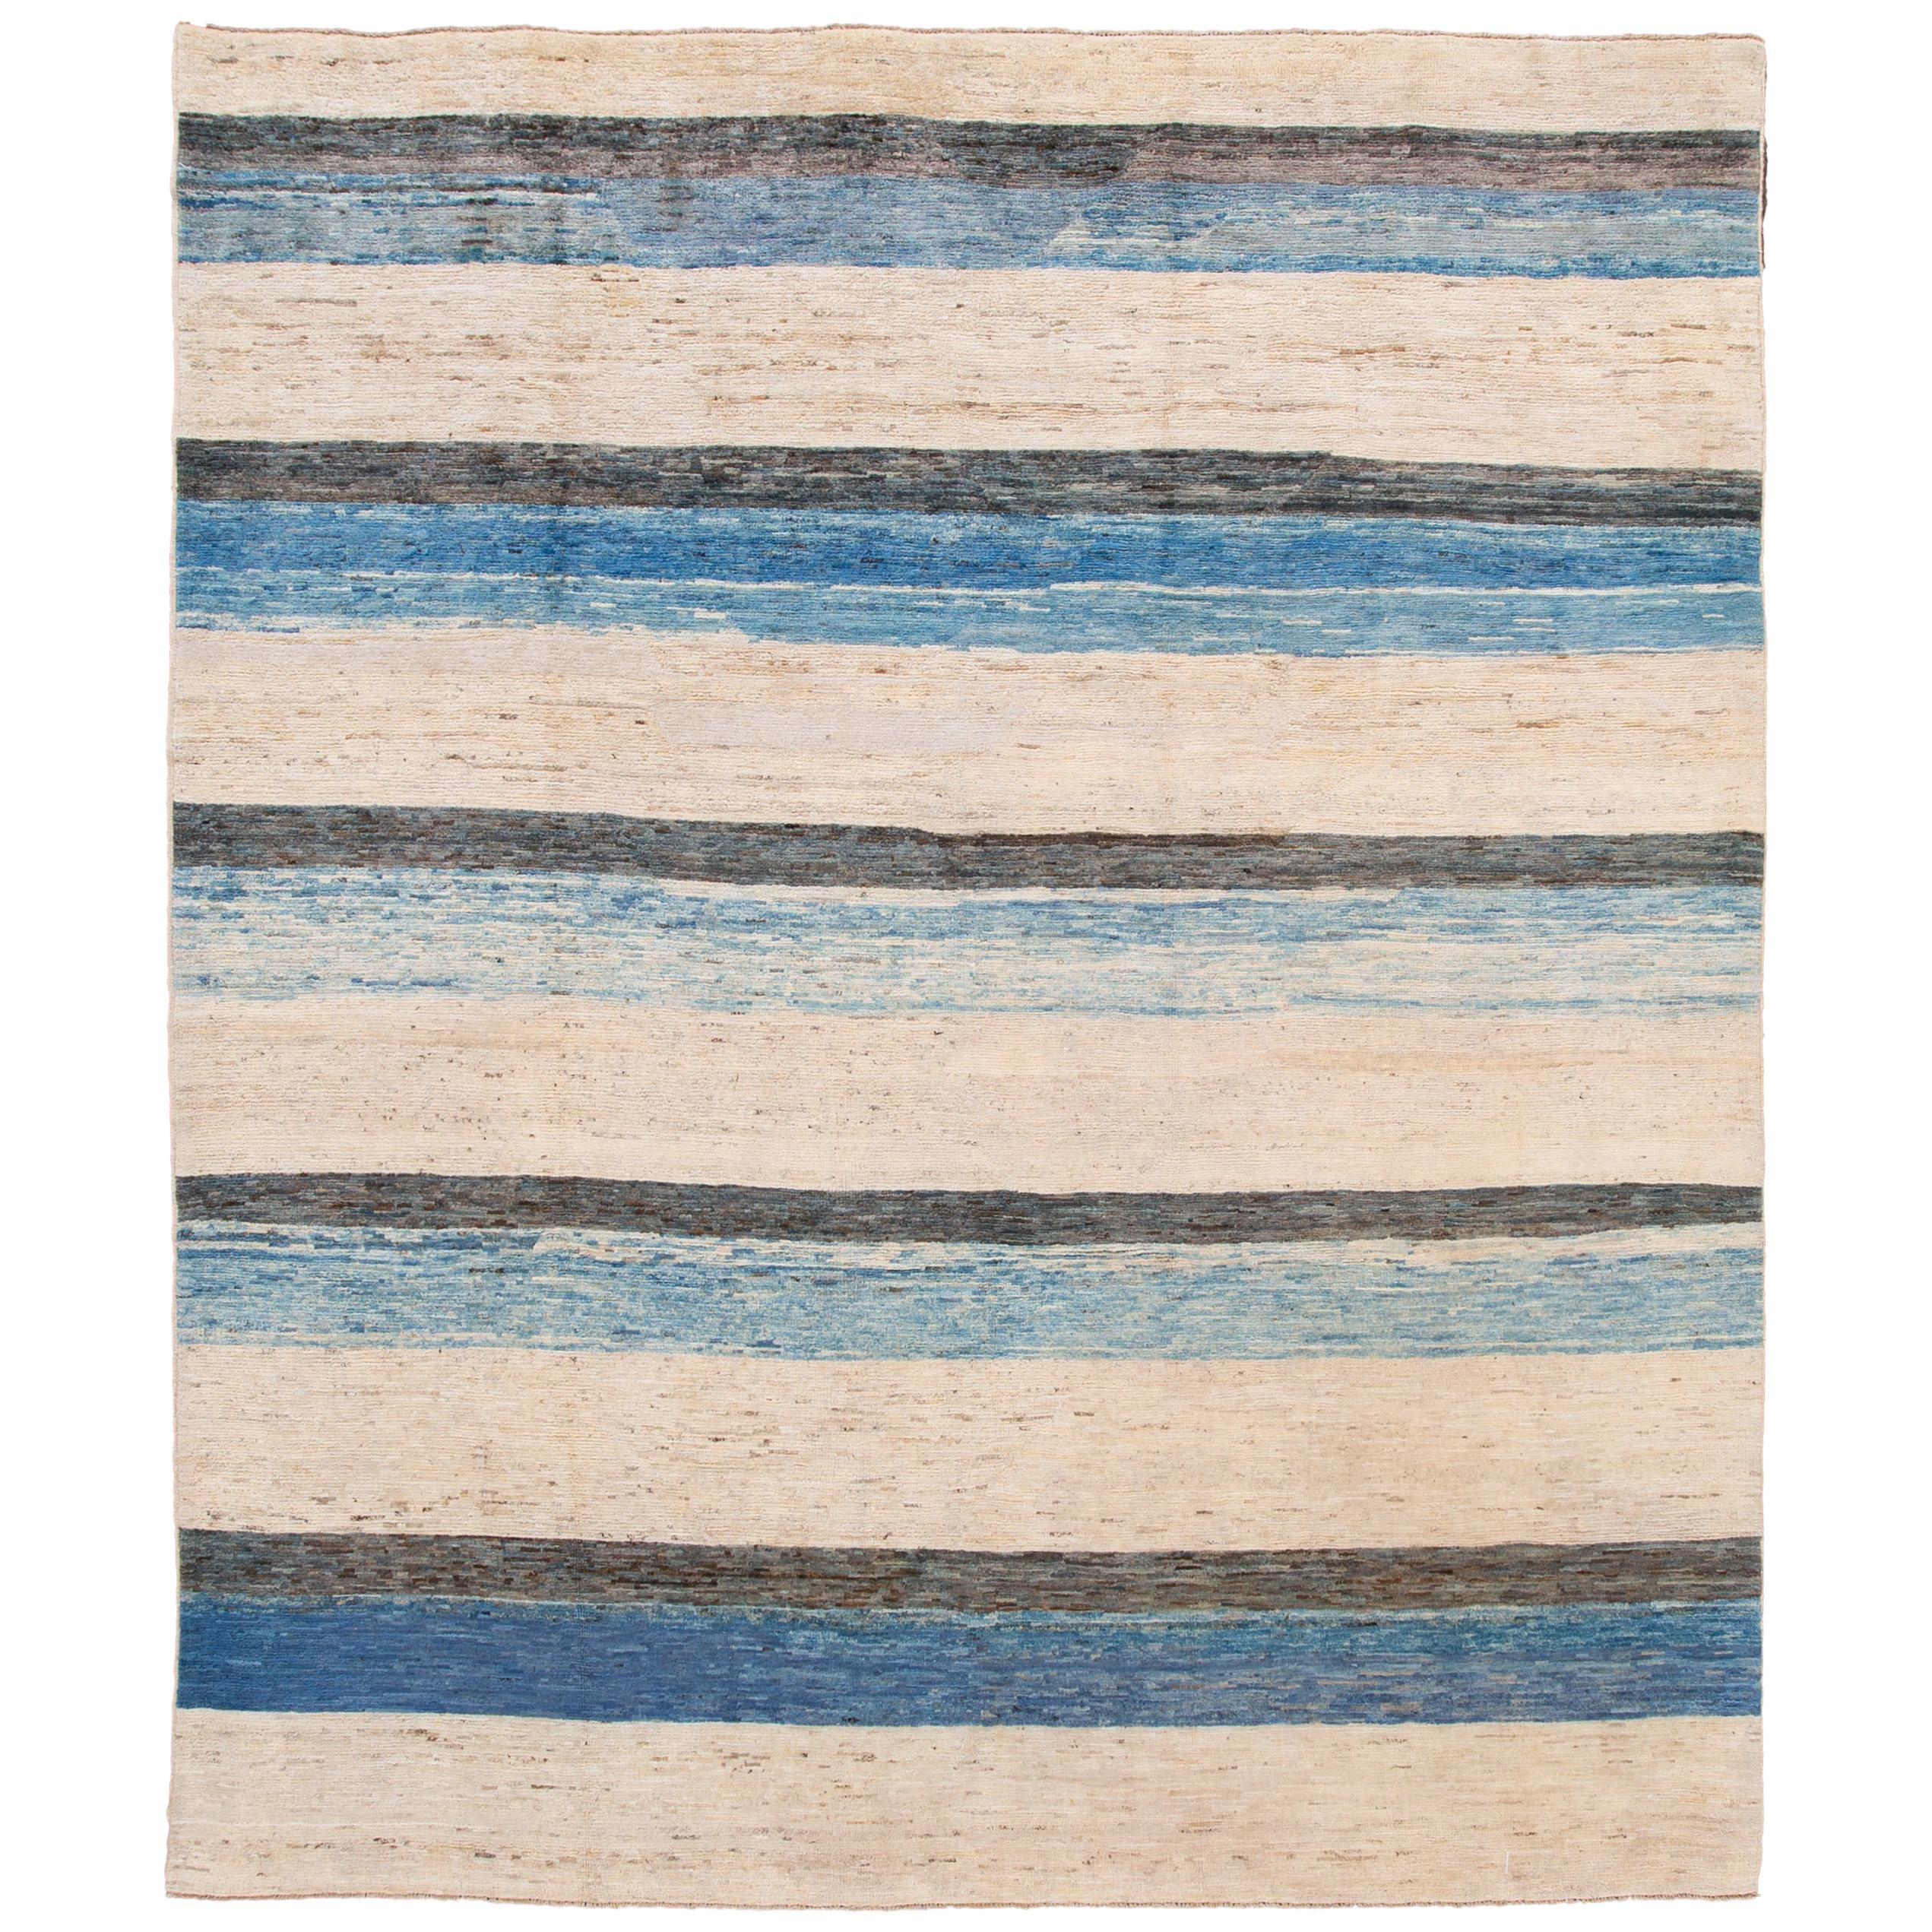 Modern Moroccan-Style Striped Room Size Wool Rug